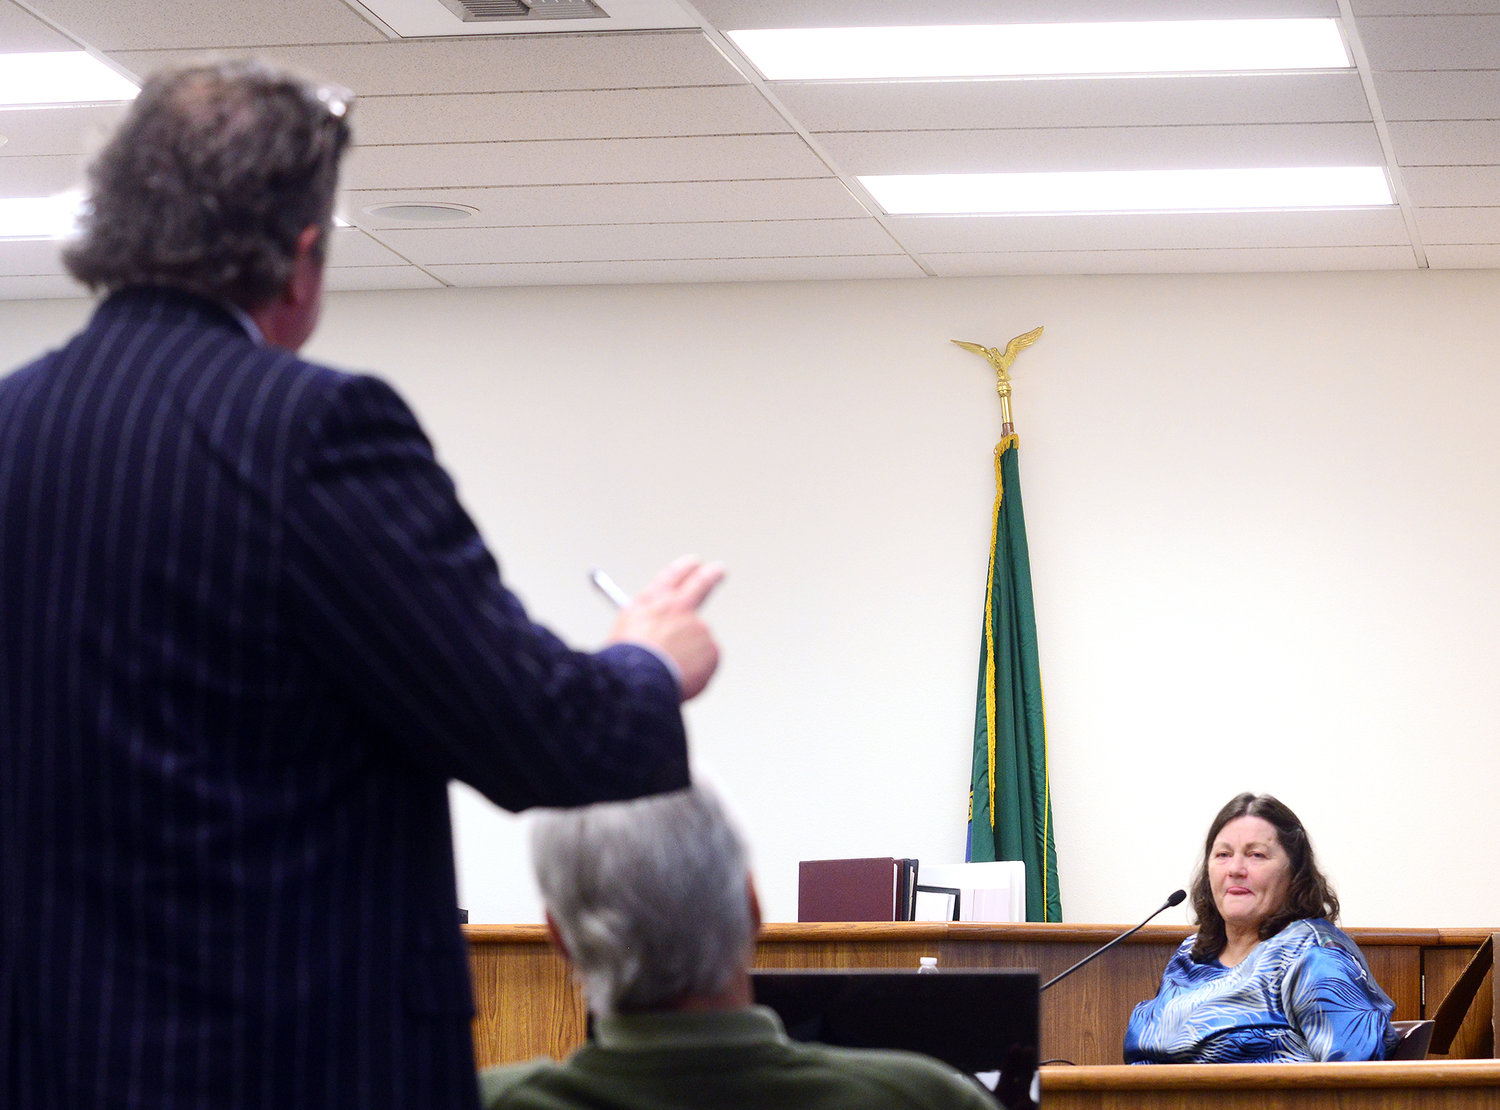 John Crowley, left, Rick Riffe's defense attorney, stands behind his client as he cross-examines Deborah George during Riffe's double-homicide trial in Lewis County Superior Court on Thursday afternoon at the Lewis County Law and Justice Center in Chehalis.